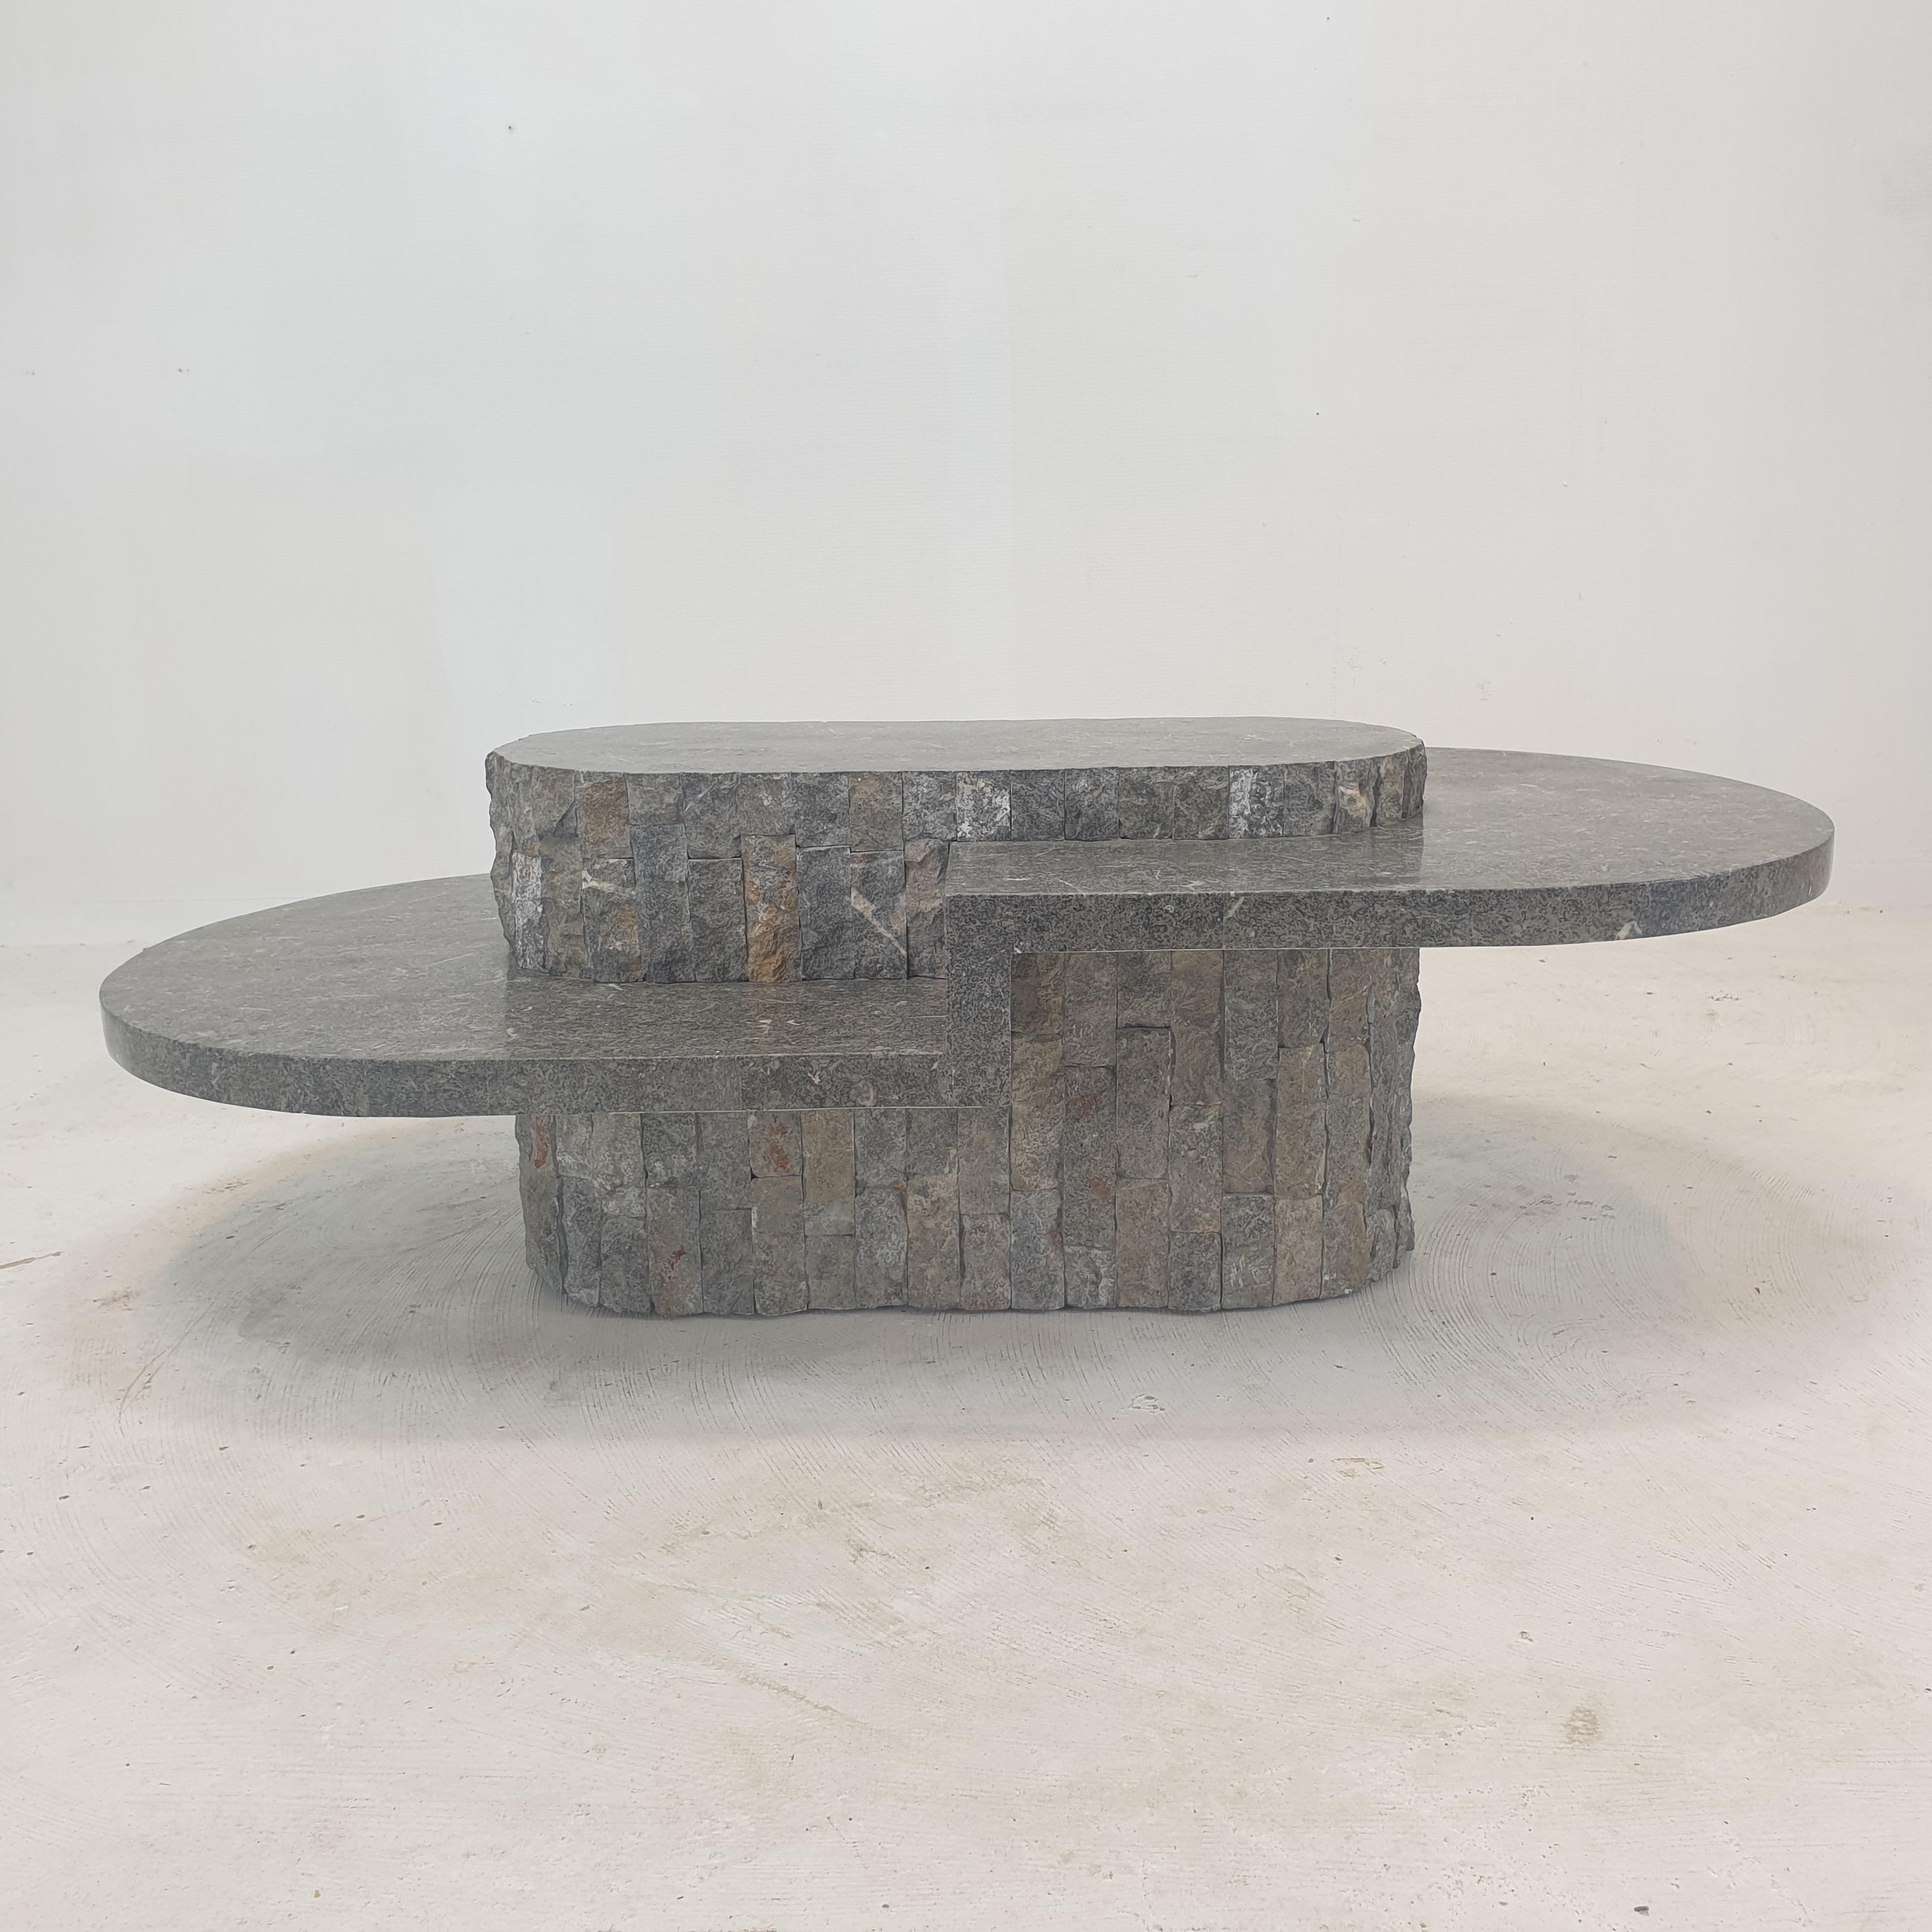 Magnussen Ponte Mactan Stone or Fossil Stone Coffee Table, 1980s For Sale 2